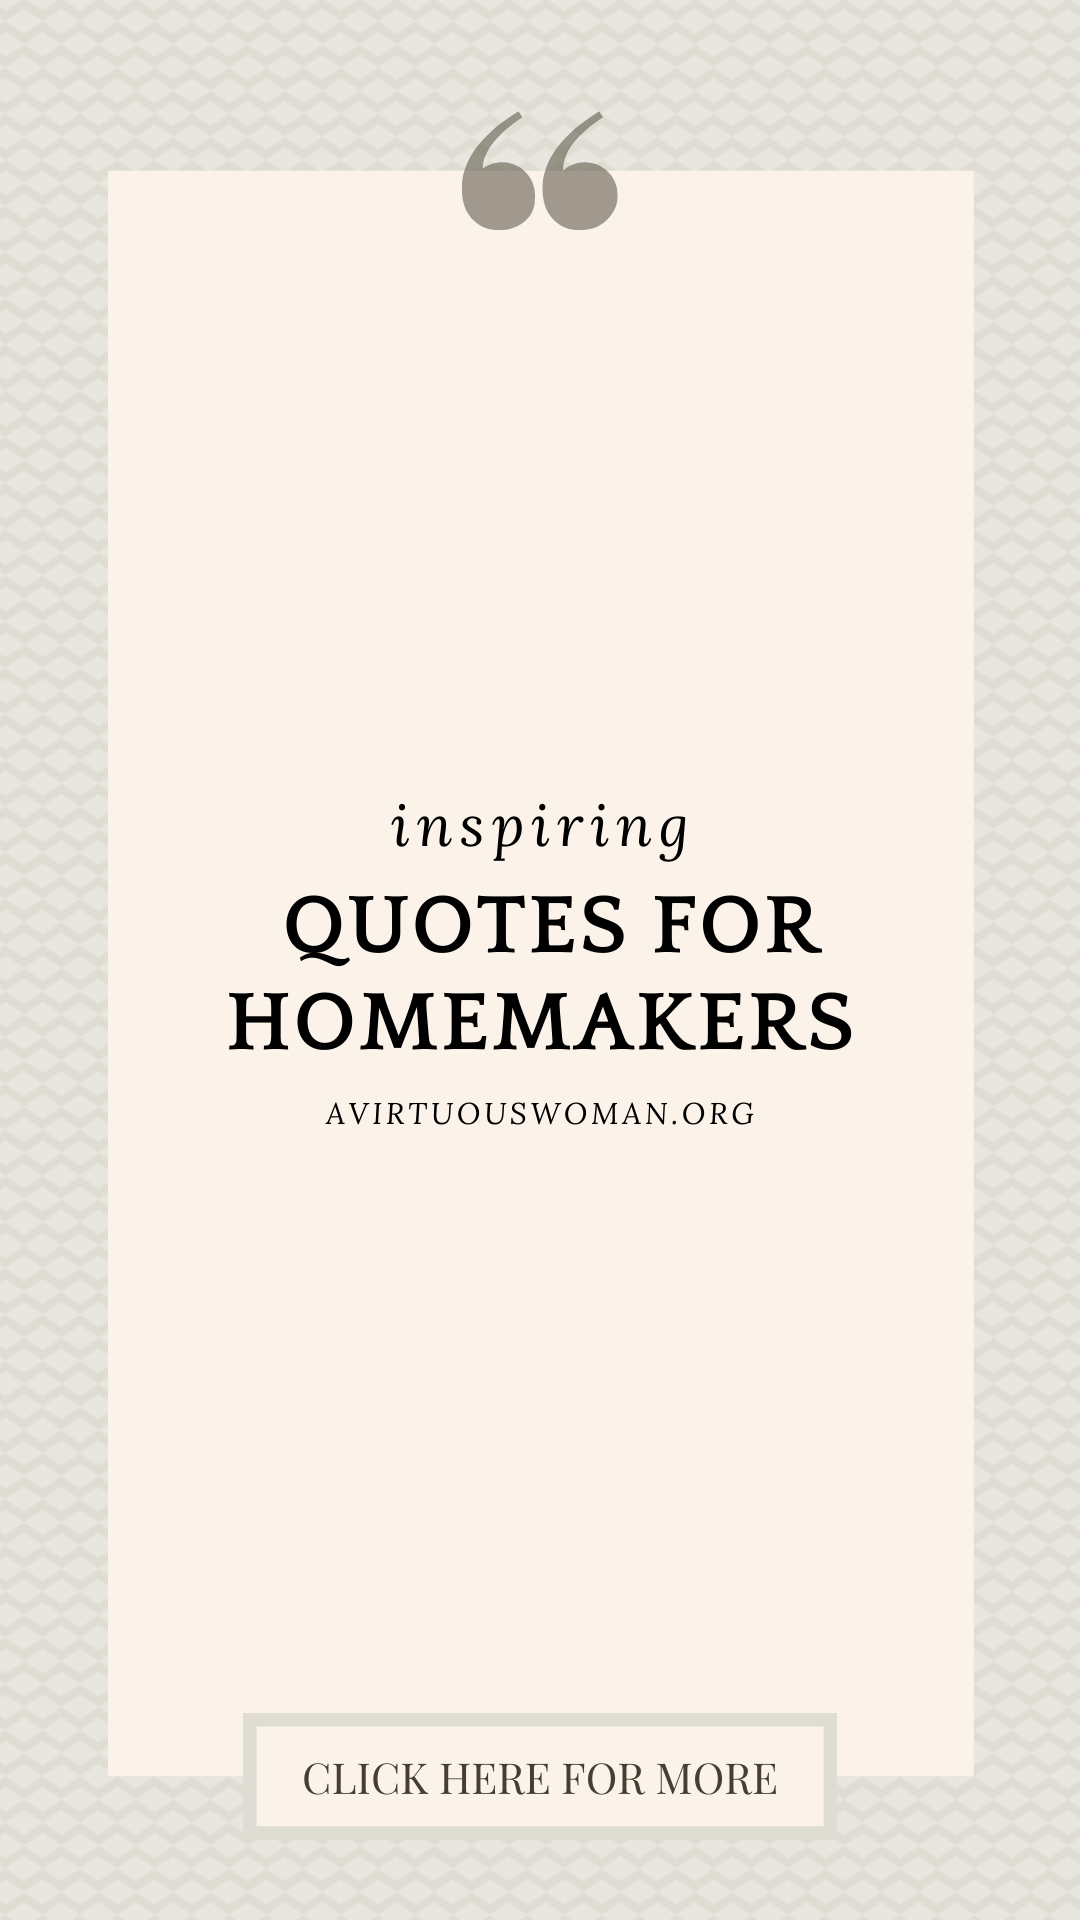 Inspiring Quotes for Homemakers